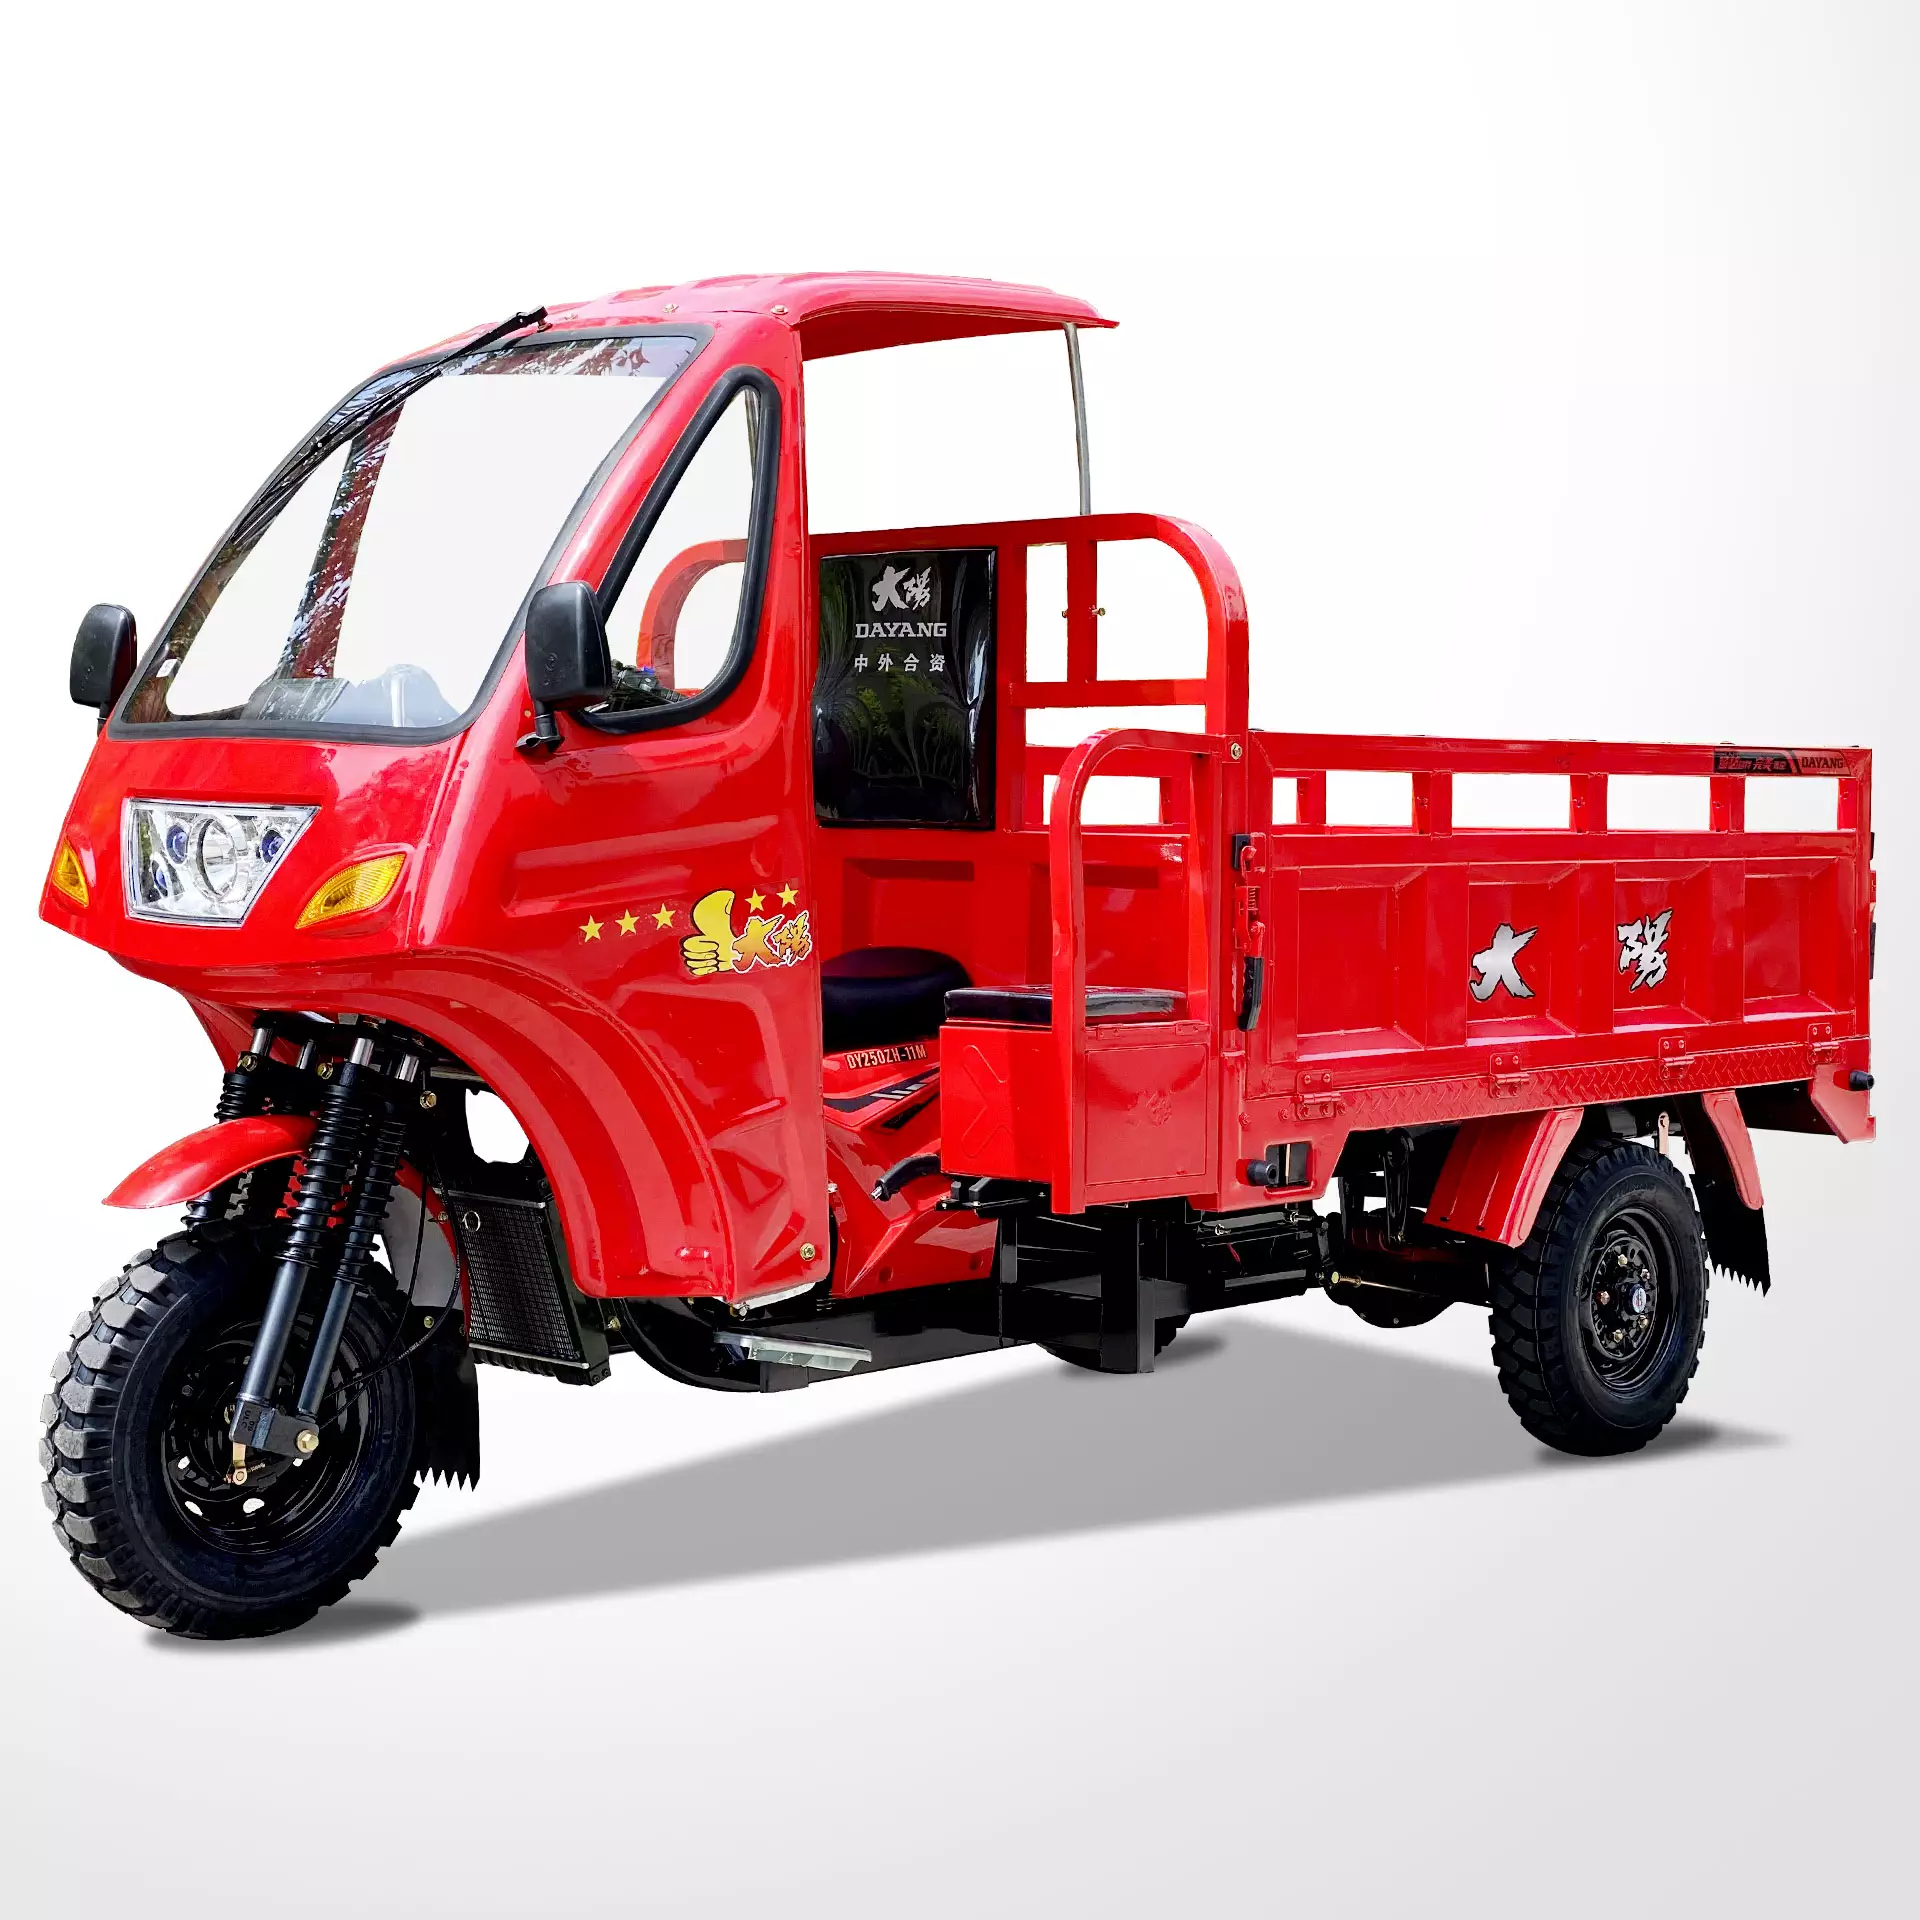 Cabin 3 Wheel Motorcycle Heavy Duty Cargo 250cc Simple New 250cc,water-cooling Engine Motorized 201 - 250cc Sale in Philippines